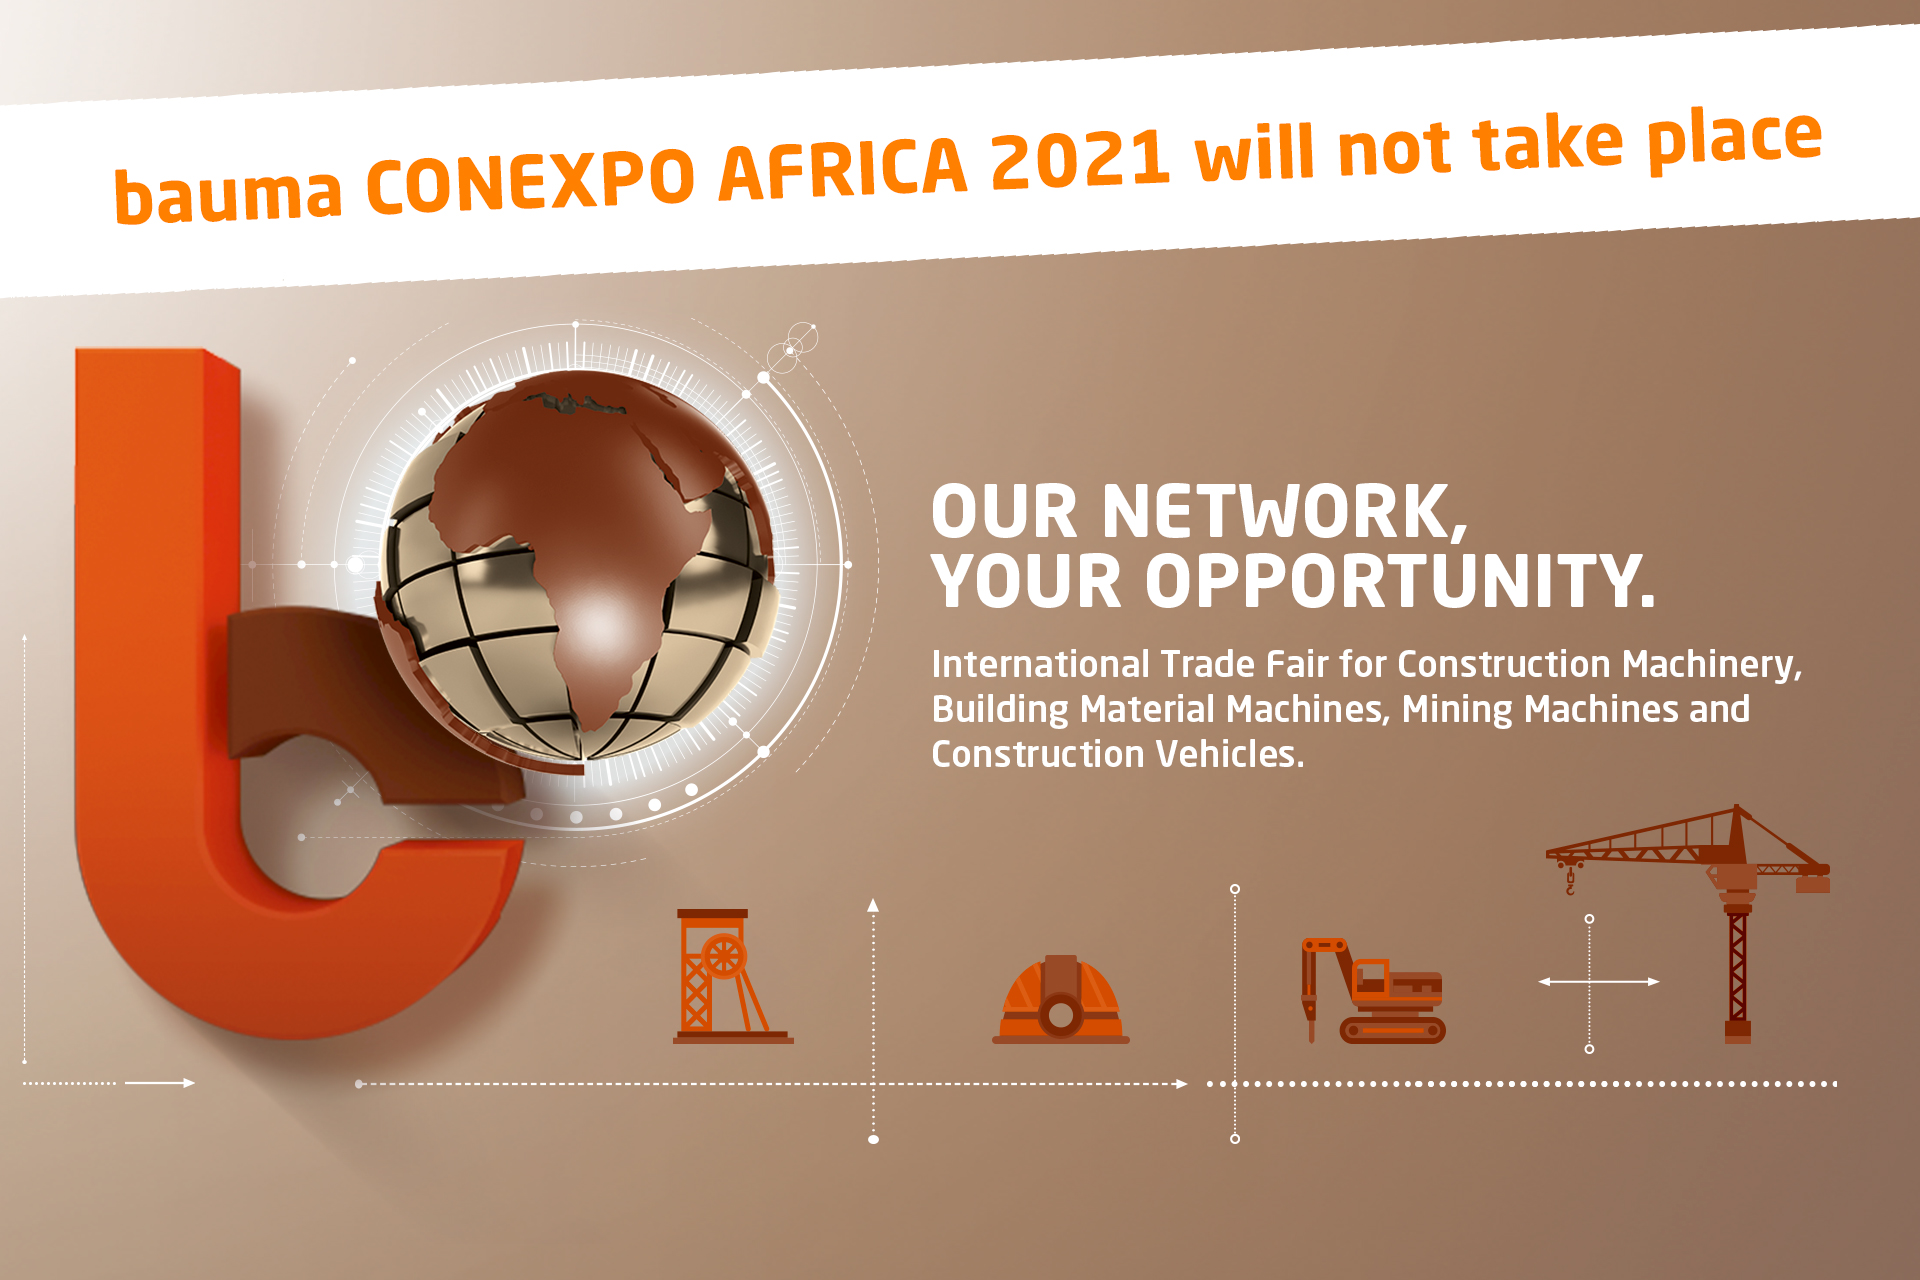  No new date has yet been given for when the bauma Conexpo Africa will take place